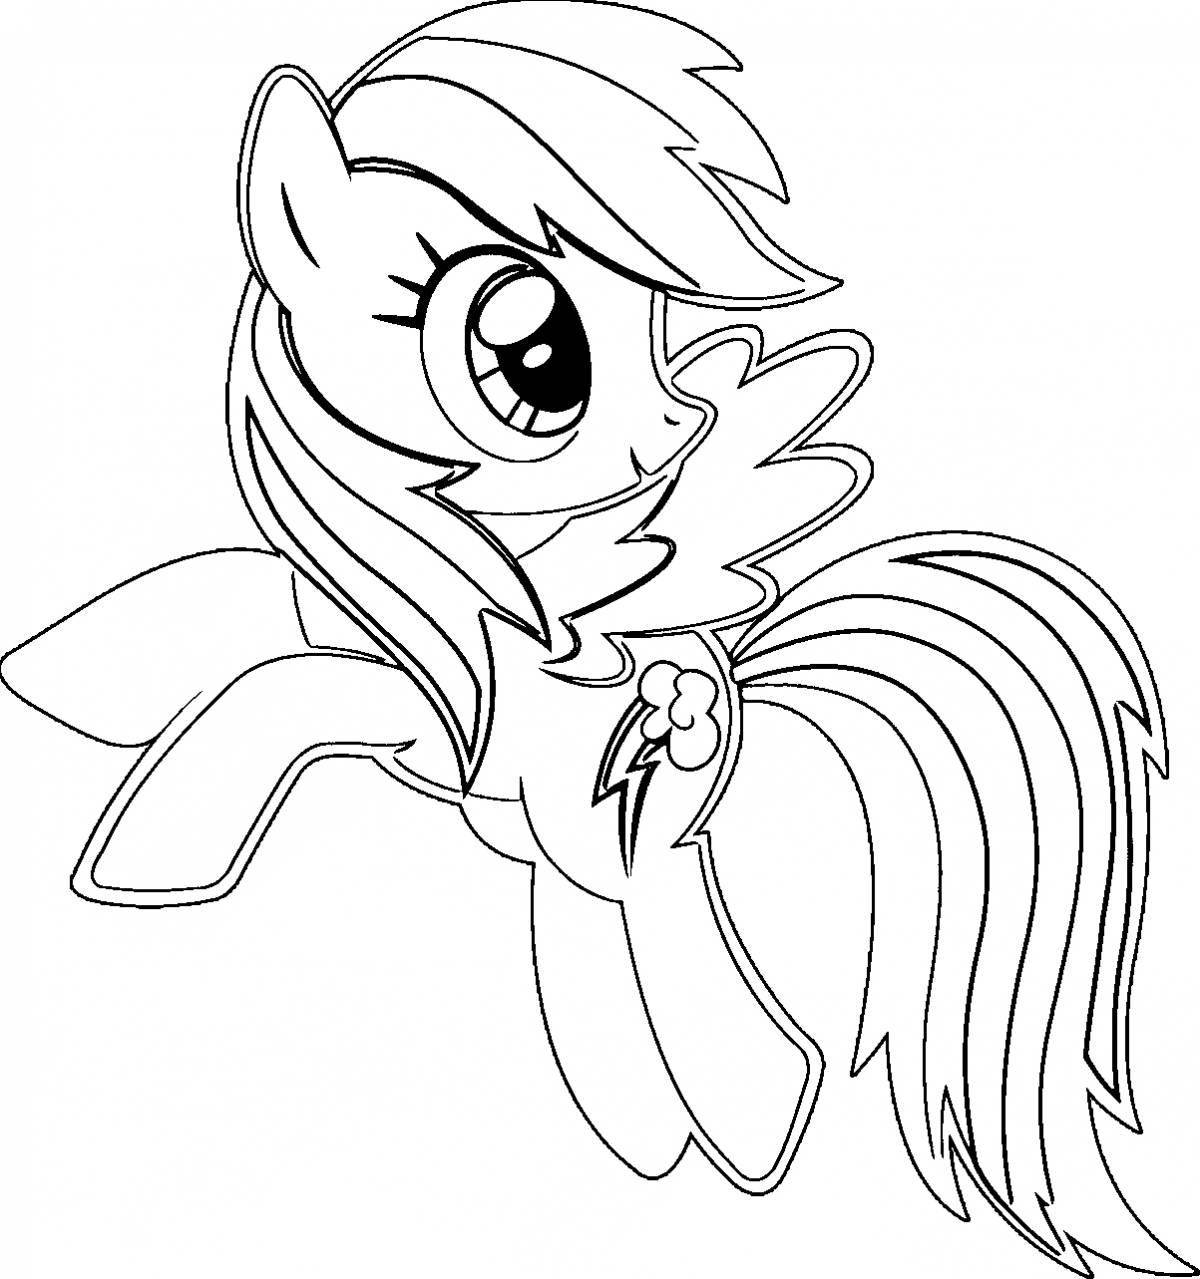 Coloring page bright rainbow pony